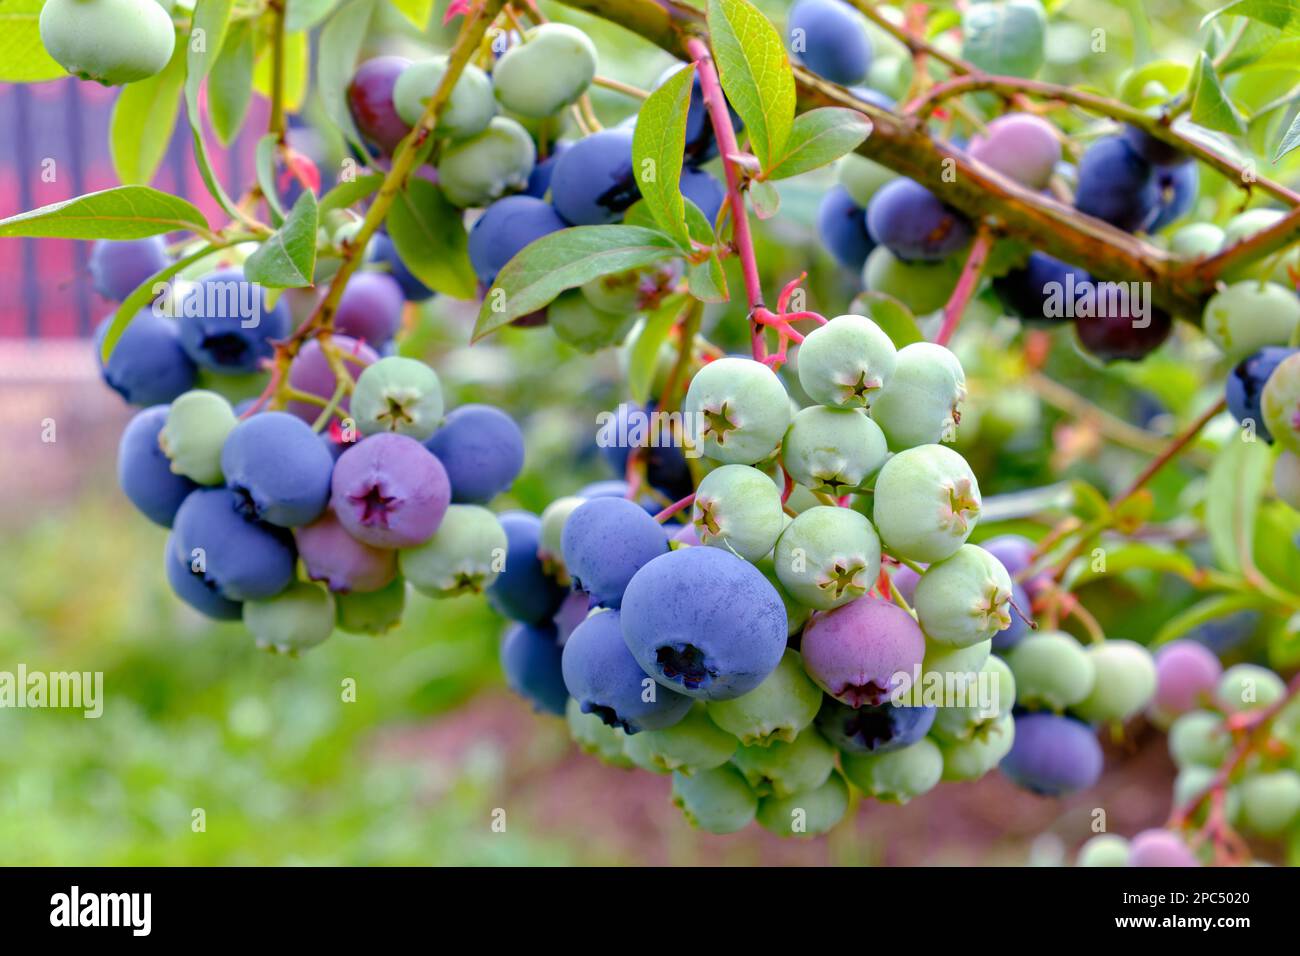 Blueberries. Many berries in bunches ripen in early August. Stock Photo